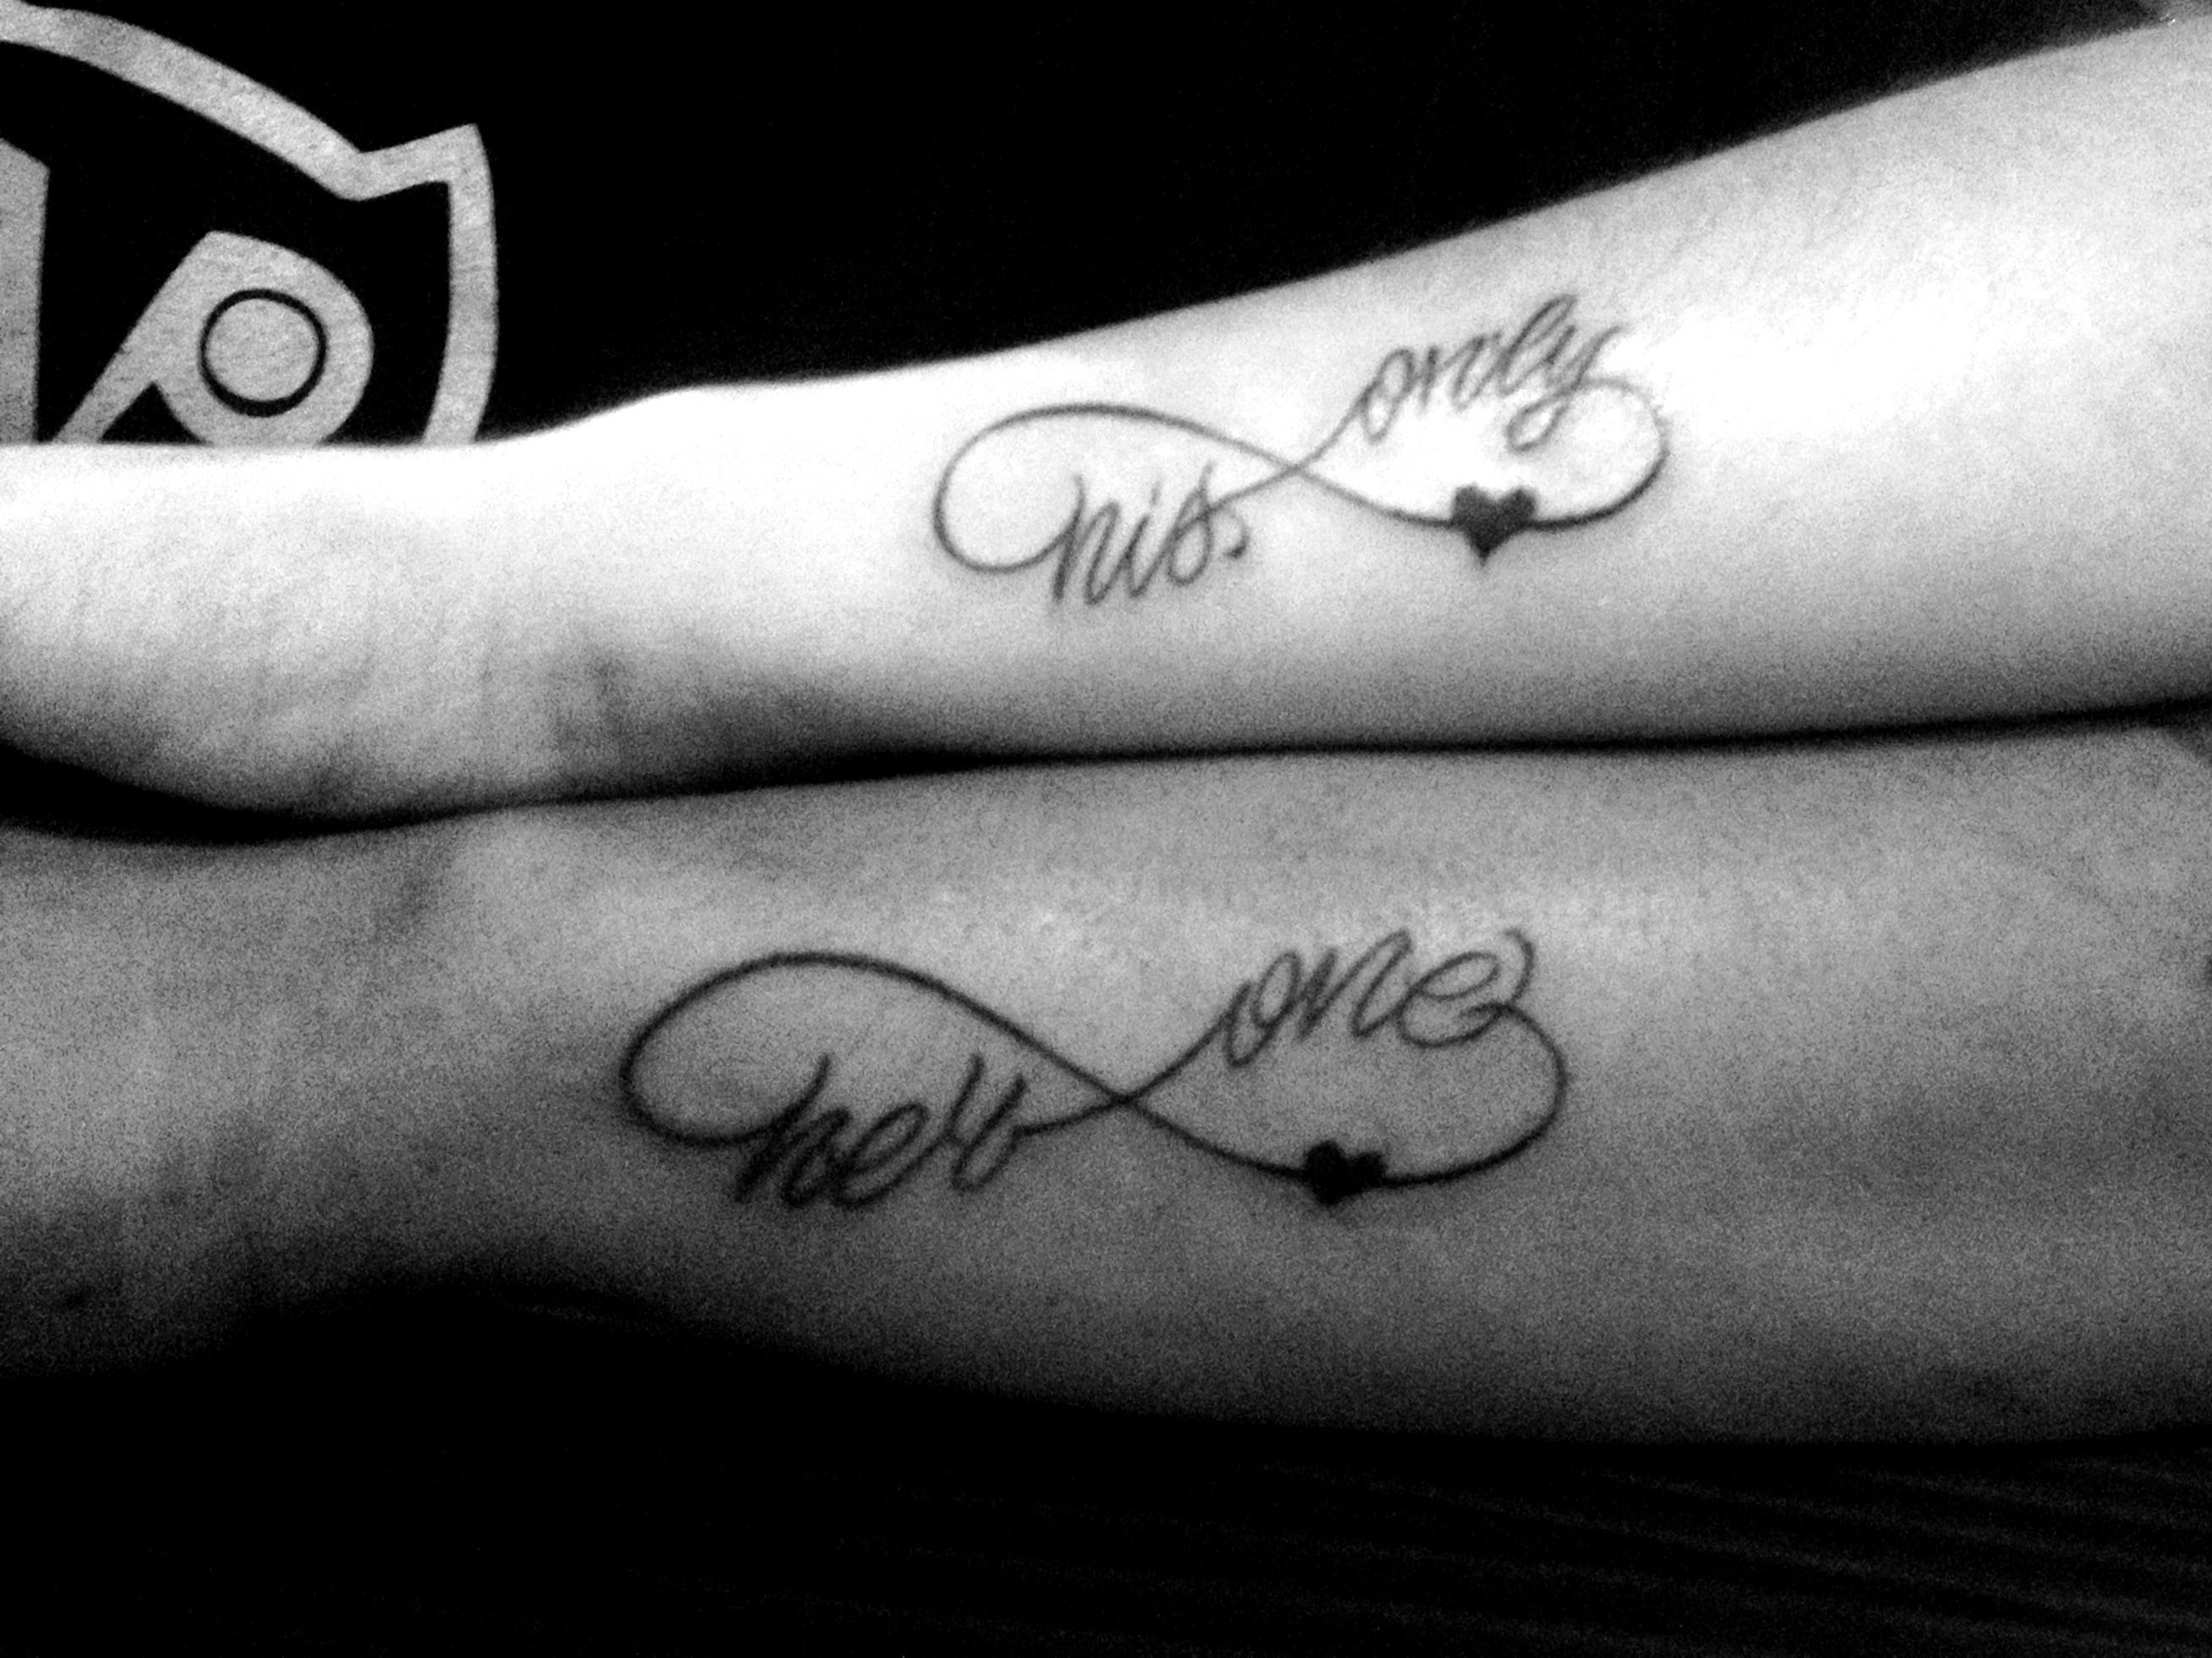 10 Spectacular His And Her Tattoo Ideas image result for his and her tattoos star wedding pinterest 2022